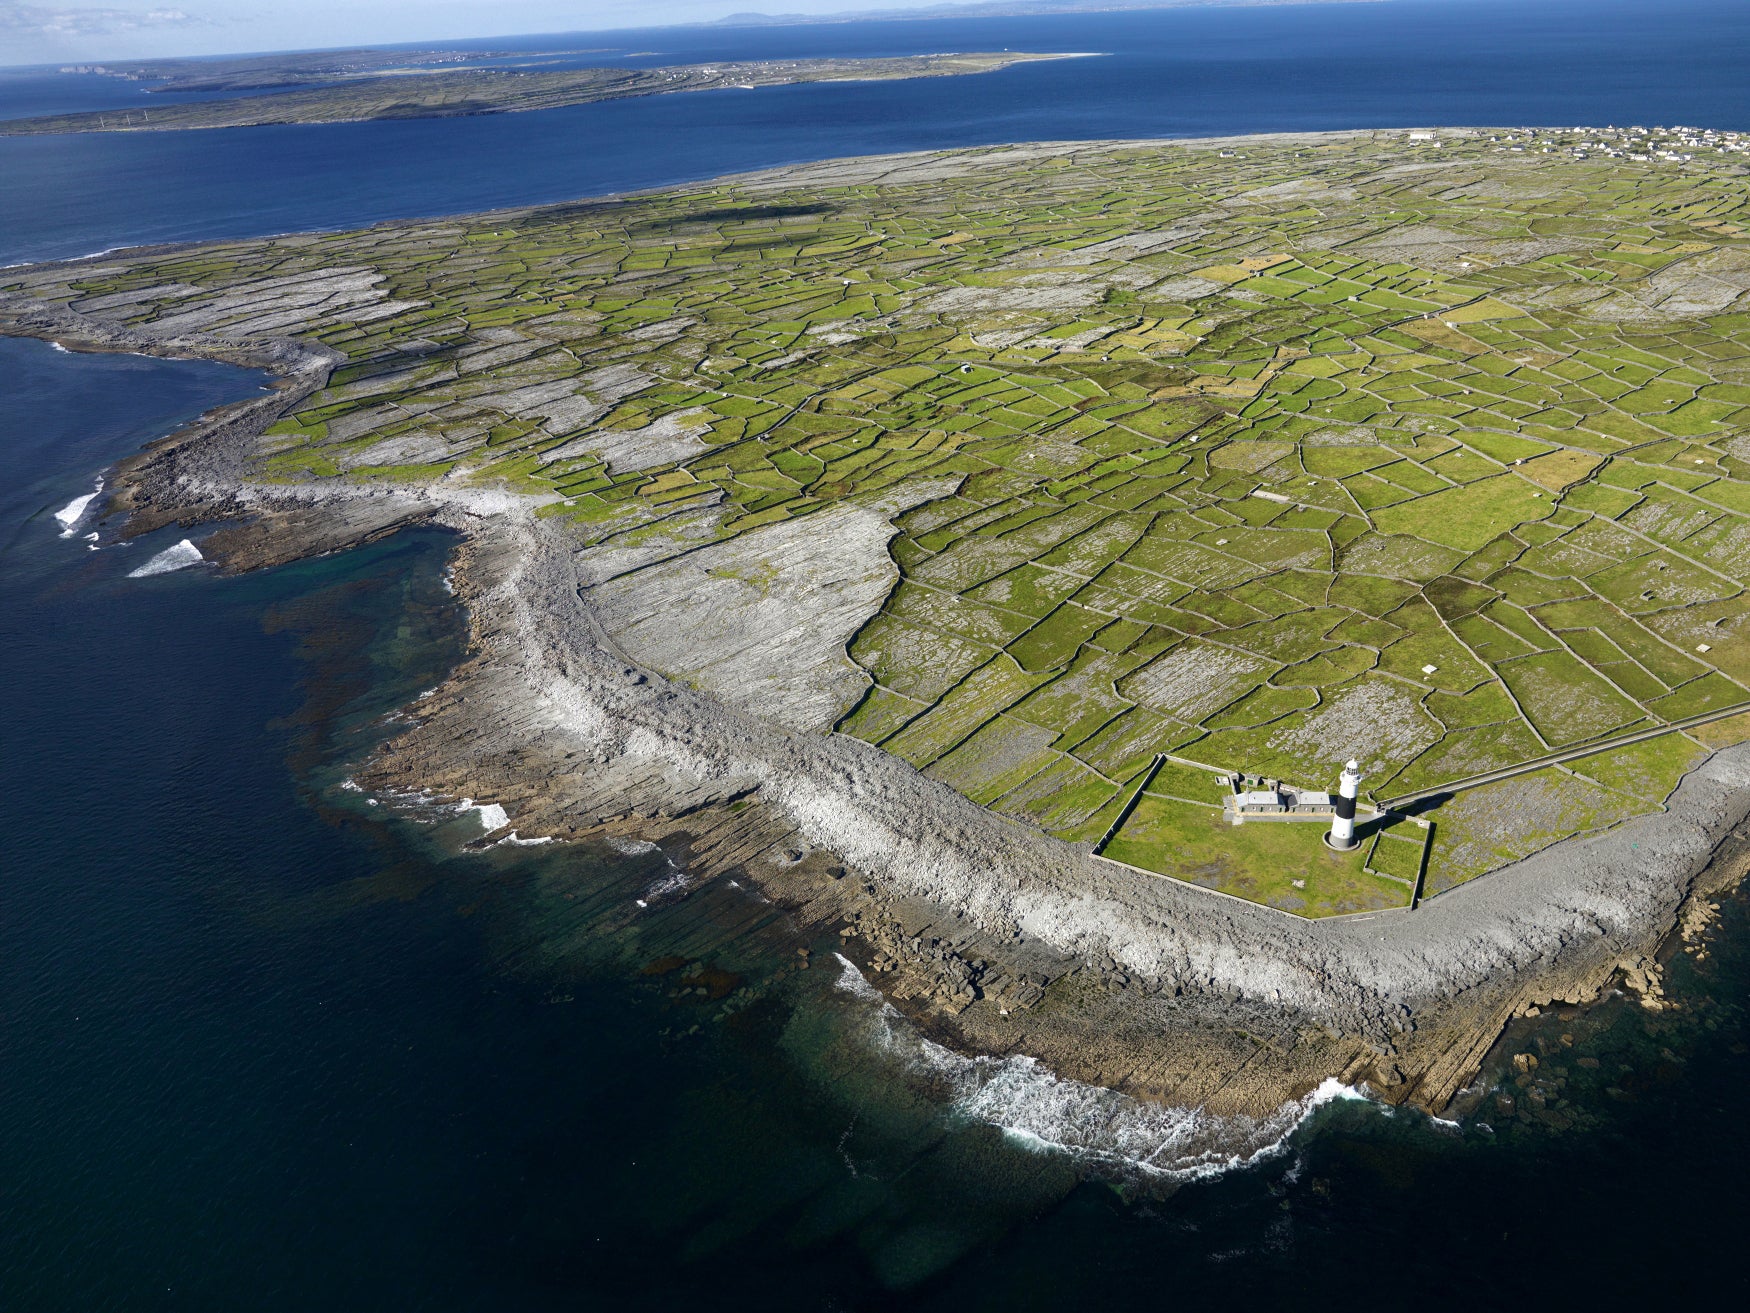 The 250 permanent residents of Inis Oirr are used to a slow pace of life